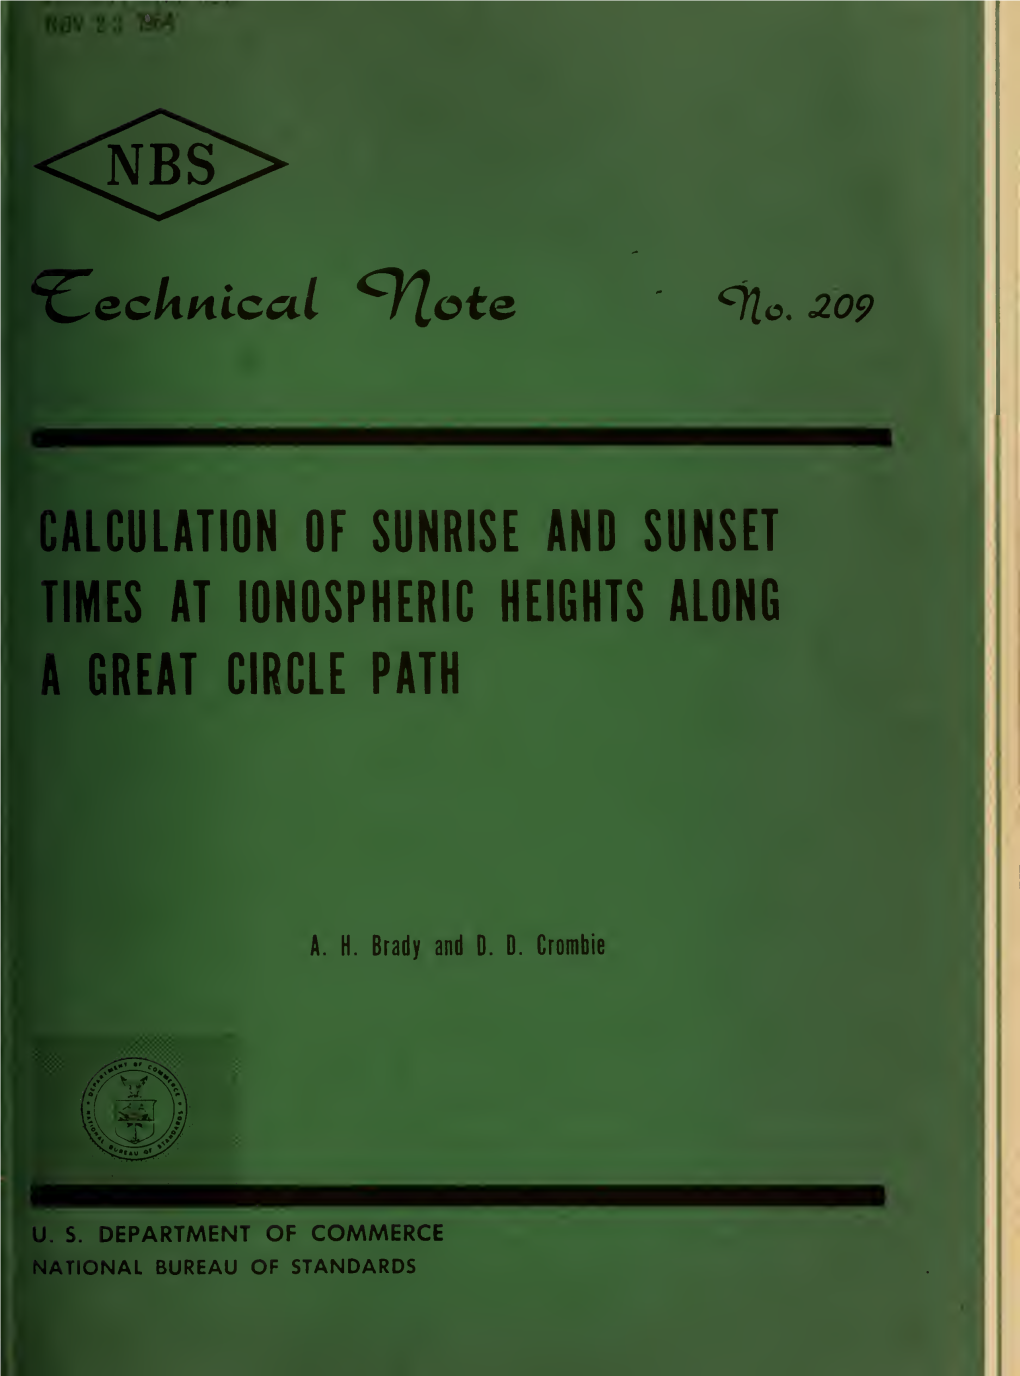 Calculation of Sunrise and Sunset Times at Ionospheric Heights Along